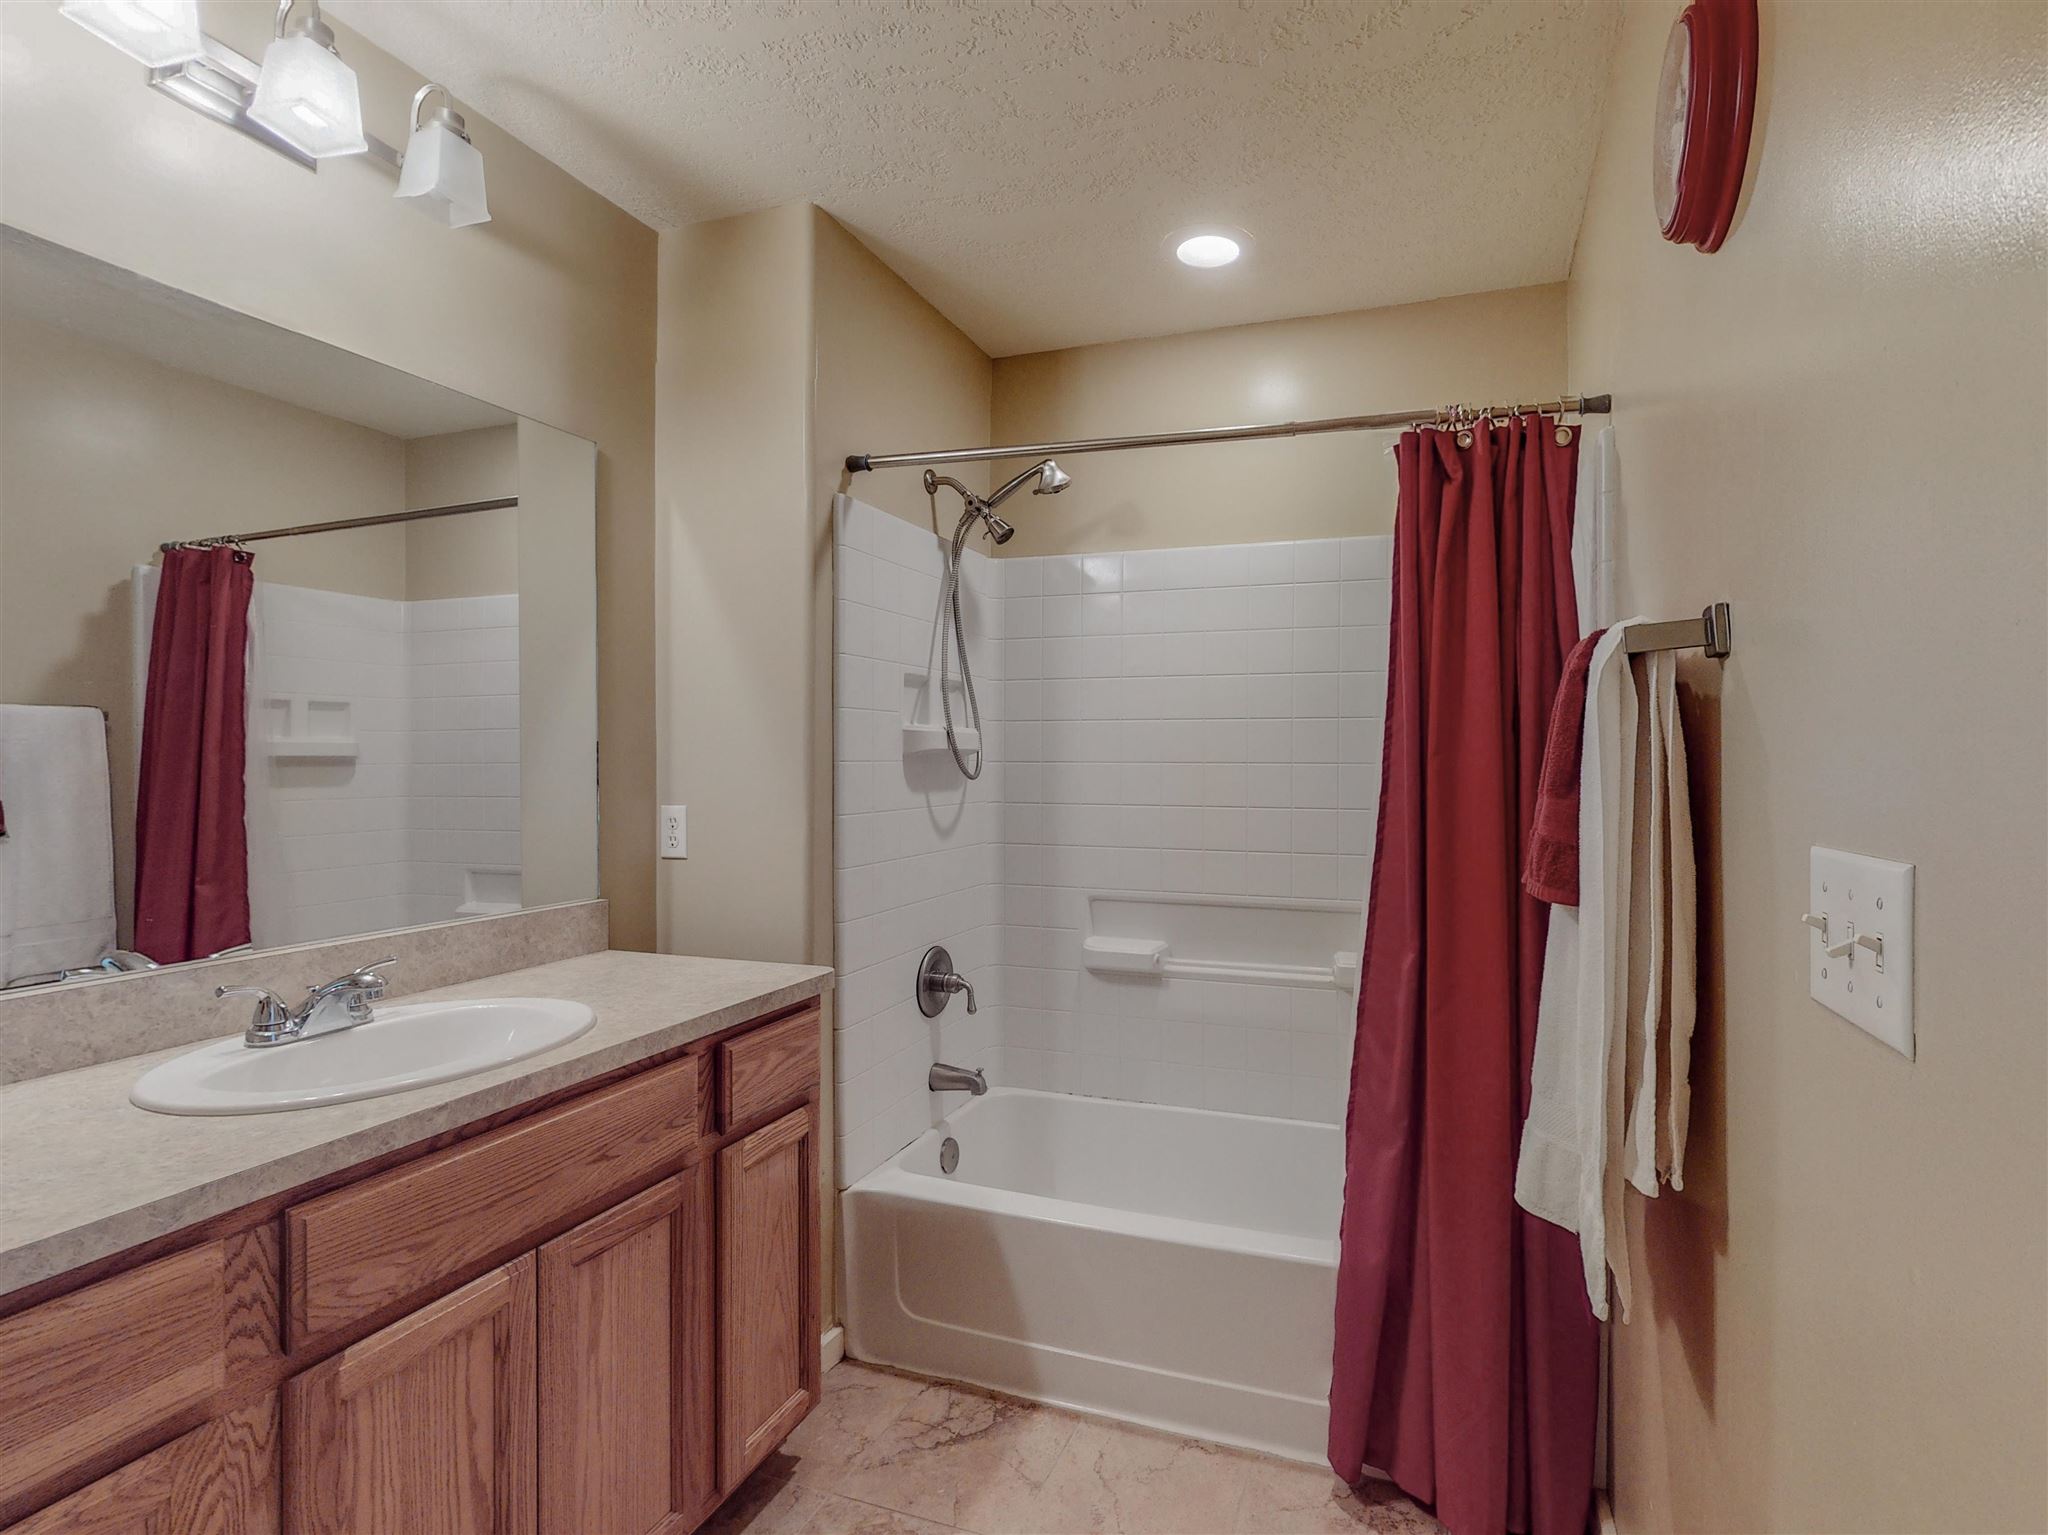 500 RODEO unit 520, Santa Fe, New Mexico 87505, 2 Bedrooms Bedrooms, ,2 BathroomsBathrooms,Residential,For Sale,500 RODEO unit 520,202103401